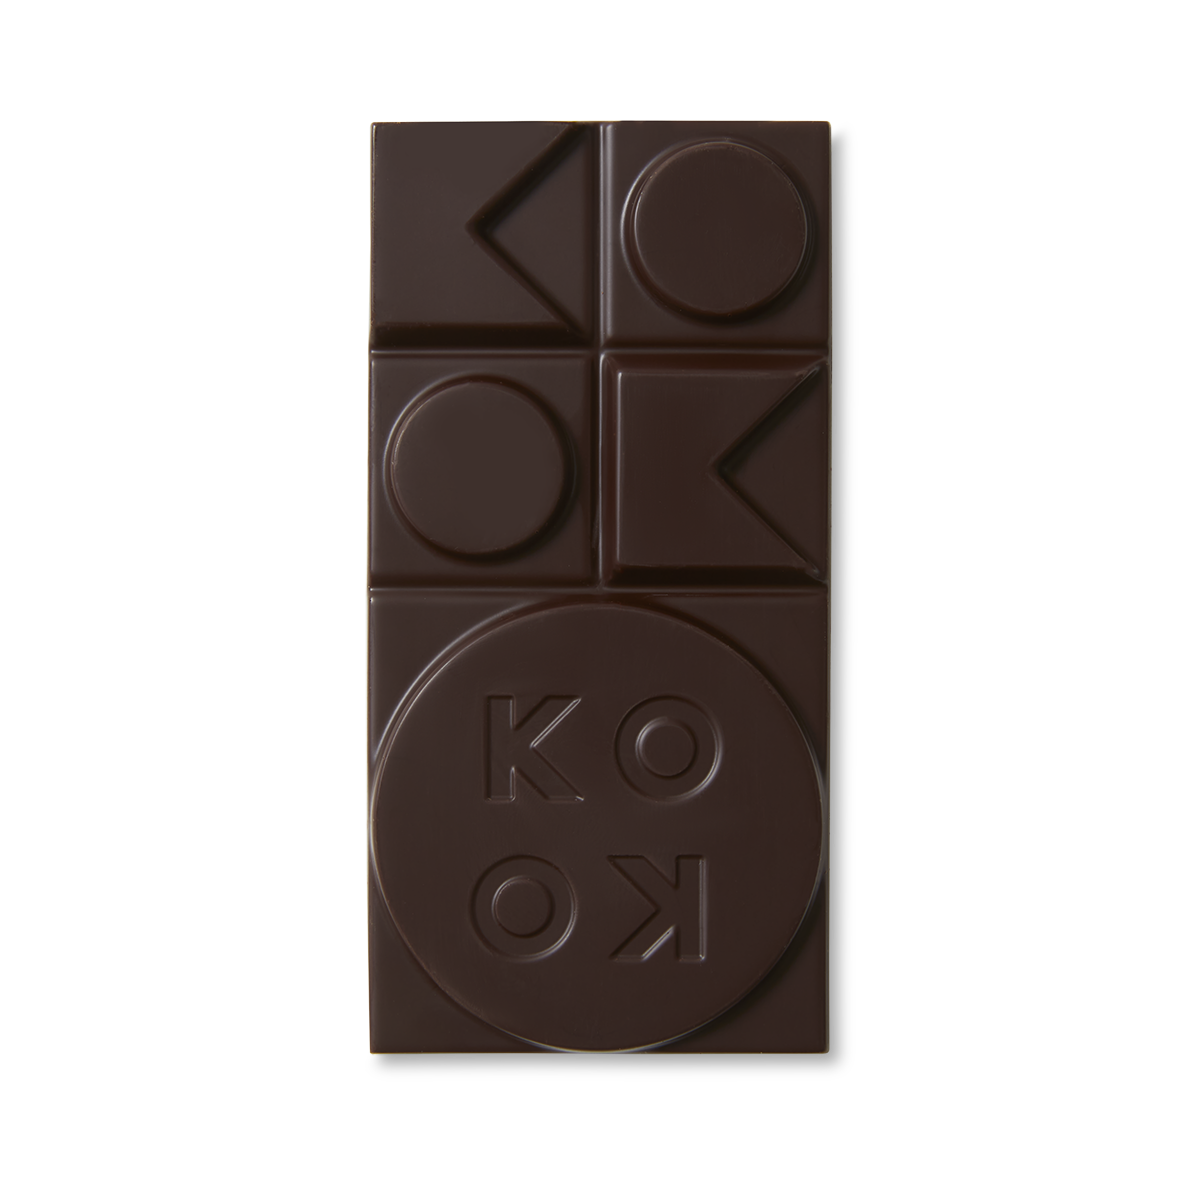 Exposed chocolate block with art deco shaped pieces